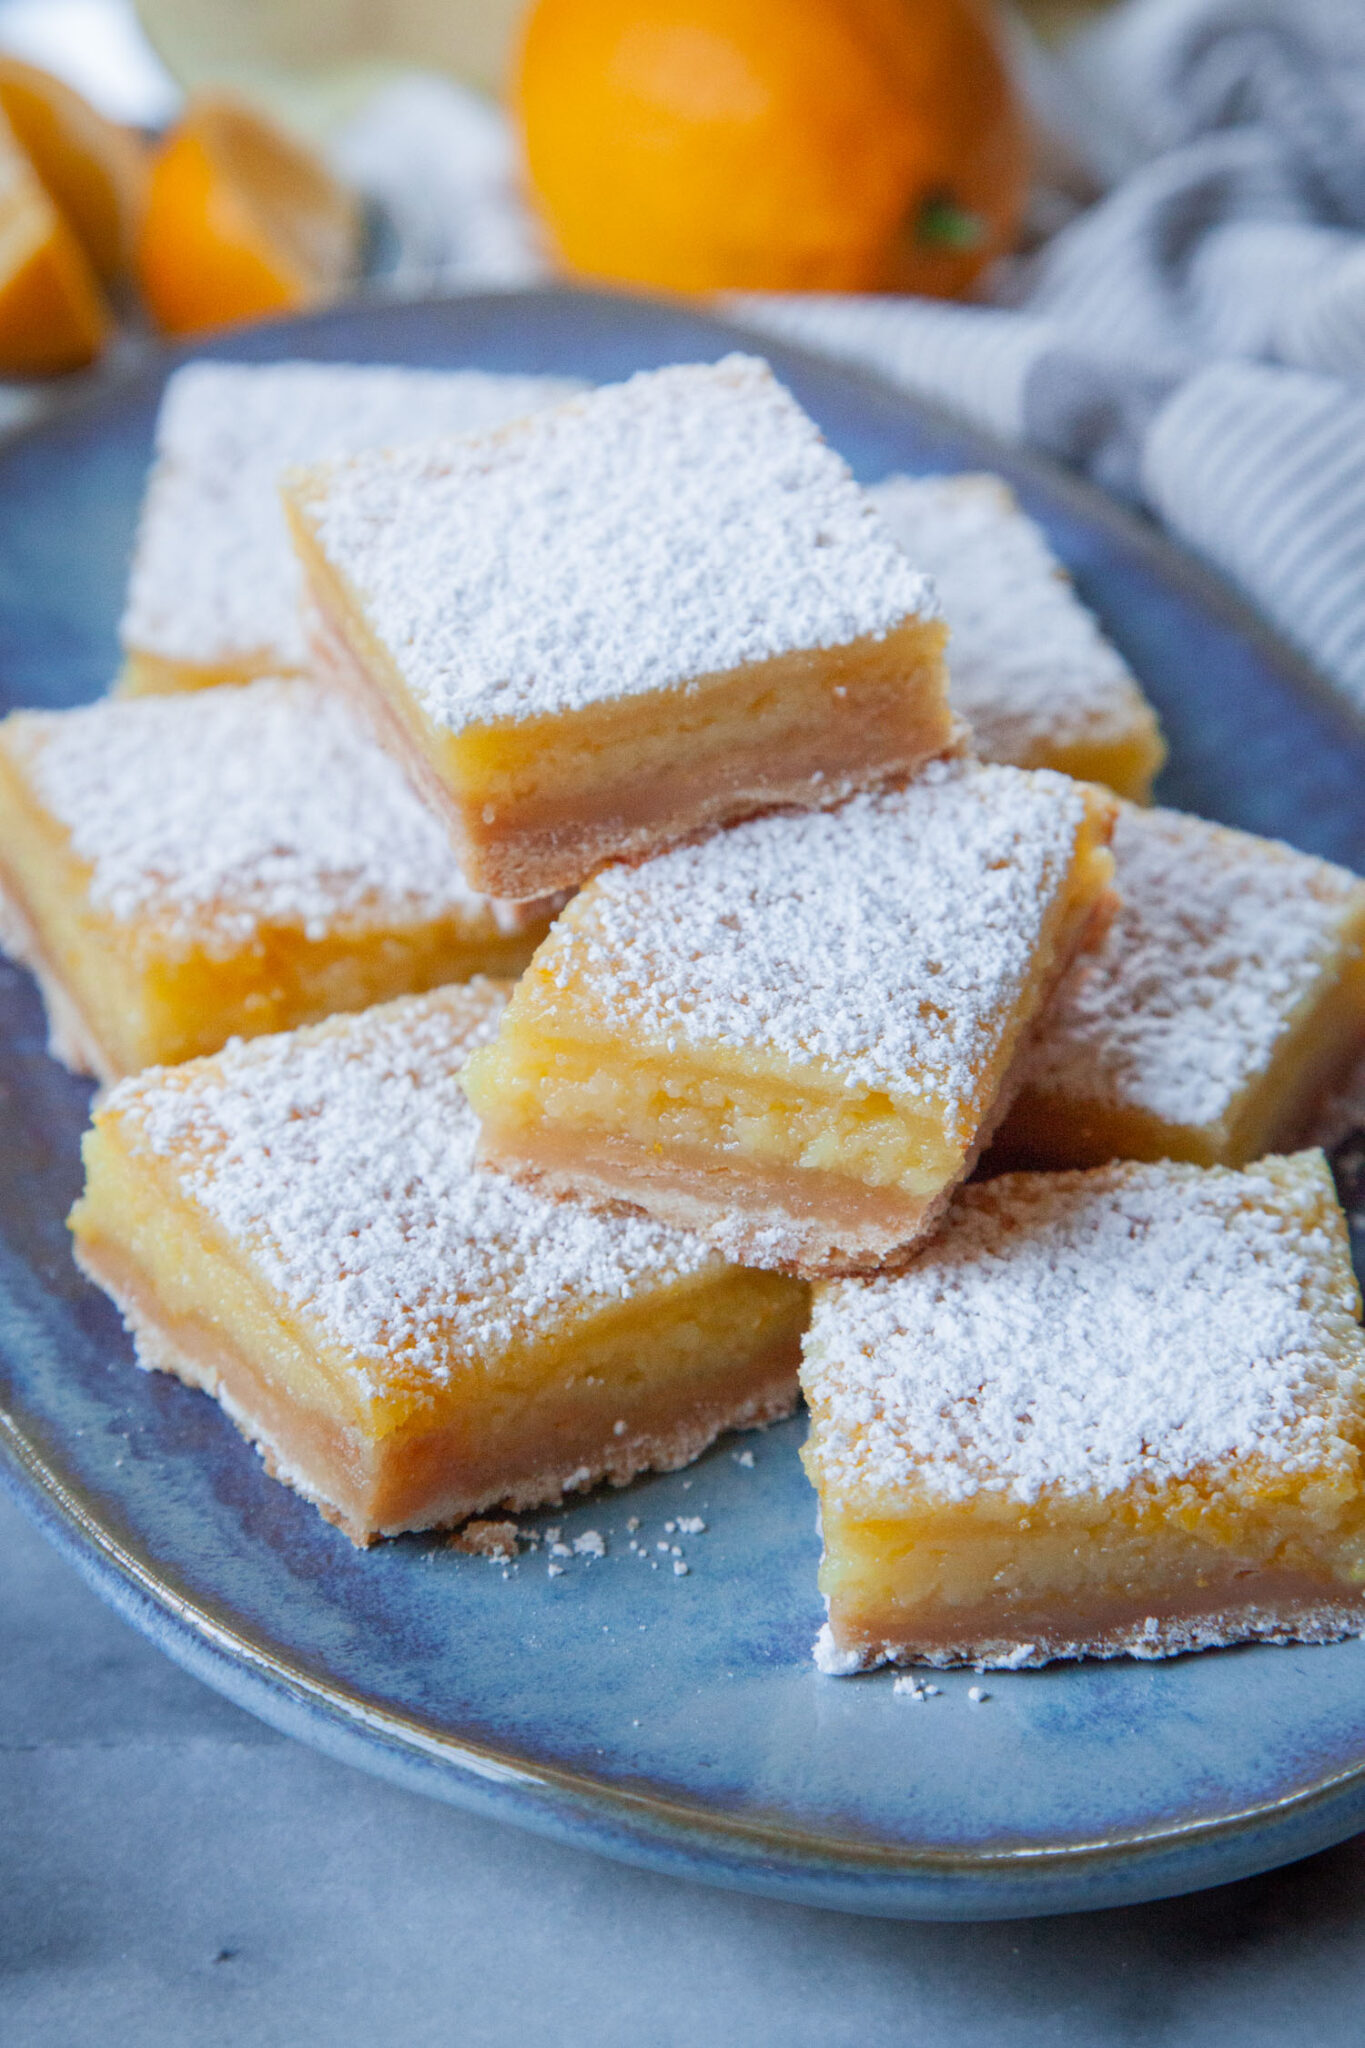 A stack of Meyer lemon bars on a blue plate, with a whole Meyer lemon behind the plate.